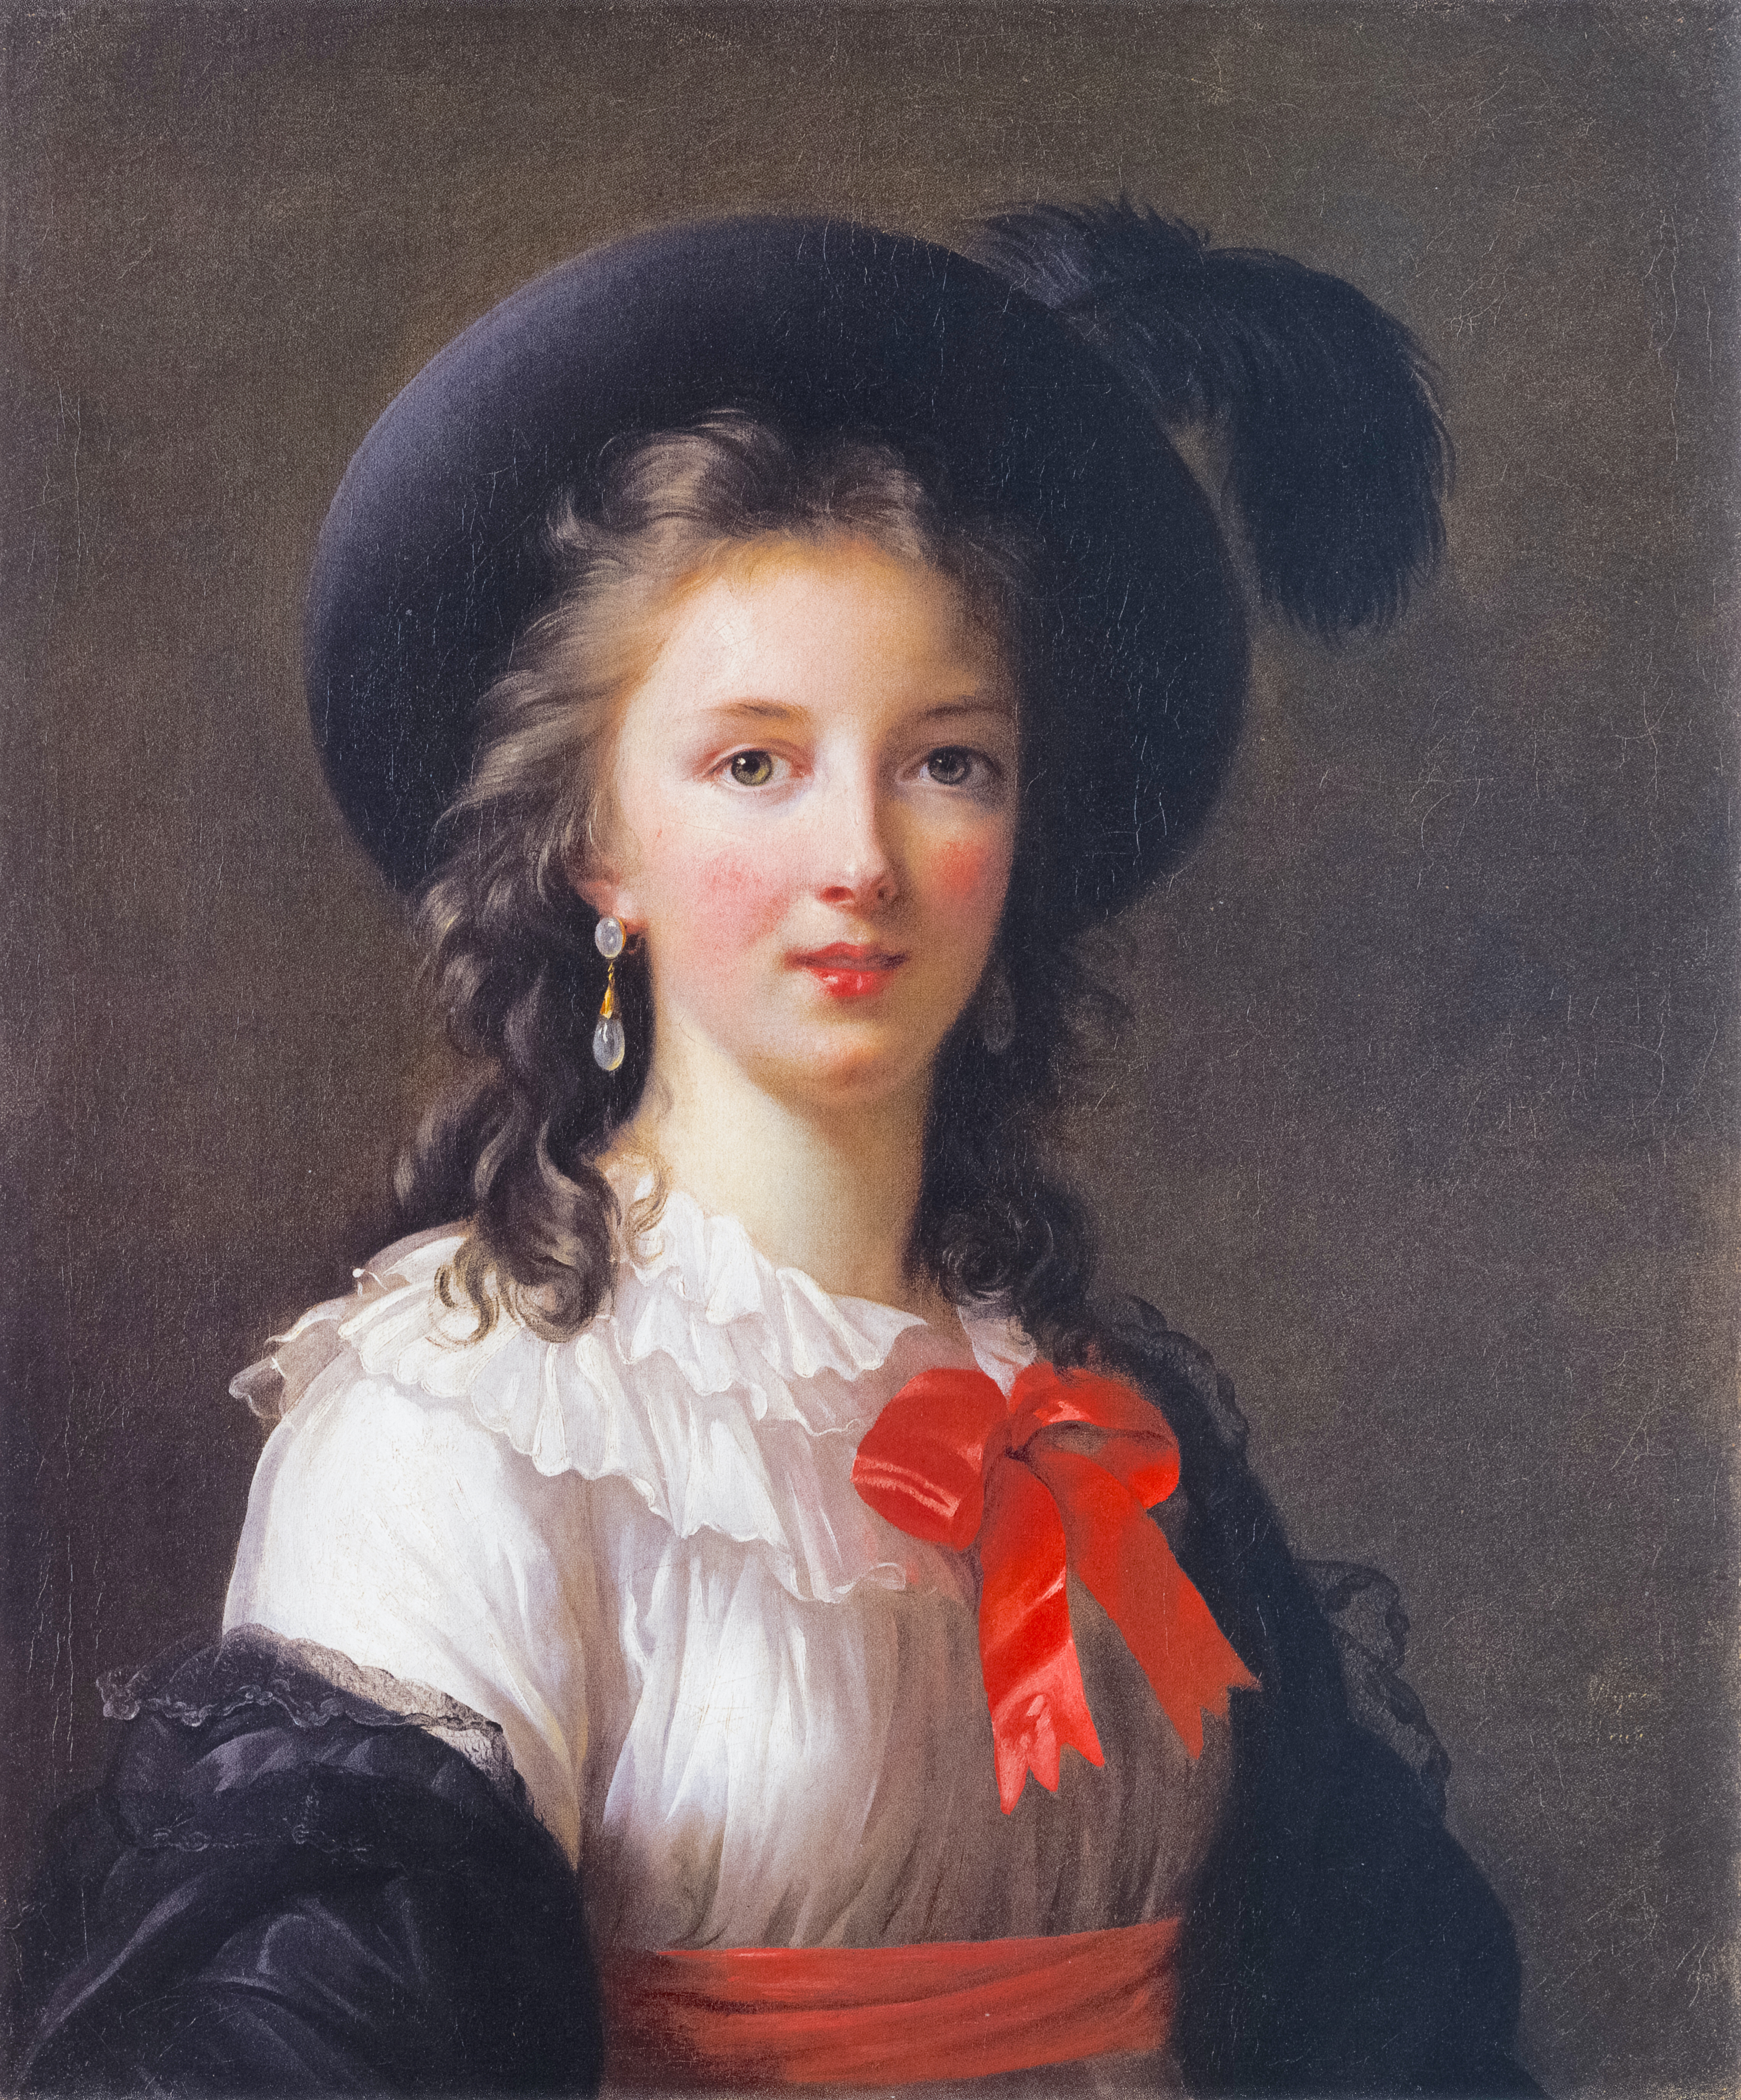 Self portrait of a woman with long curling hair, drop earrings, hat with plume, and a red bow and waist on her dress.